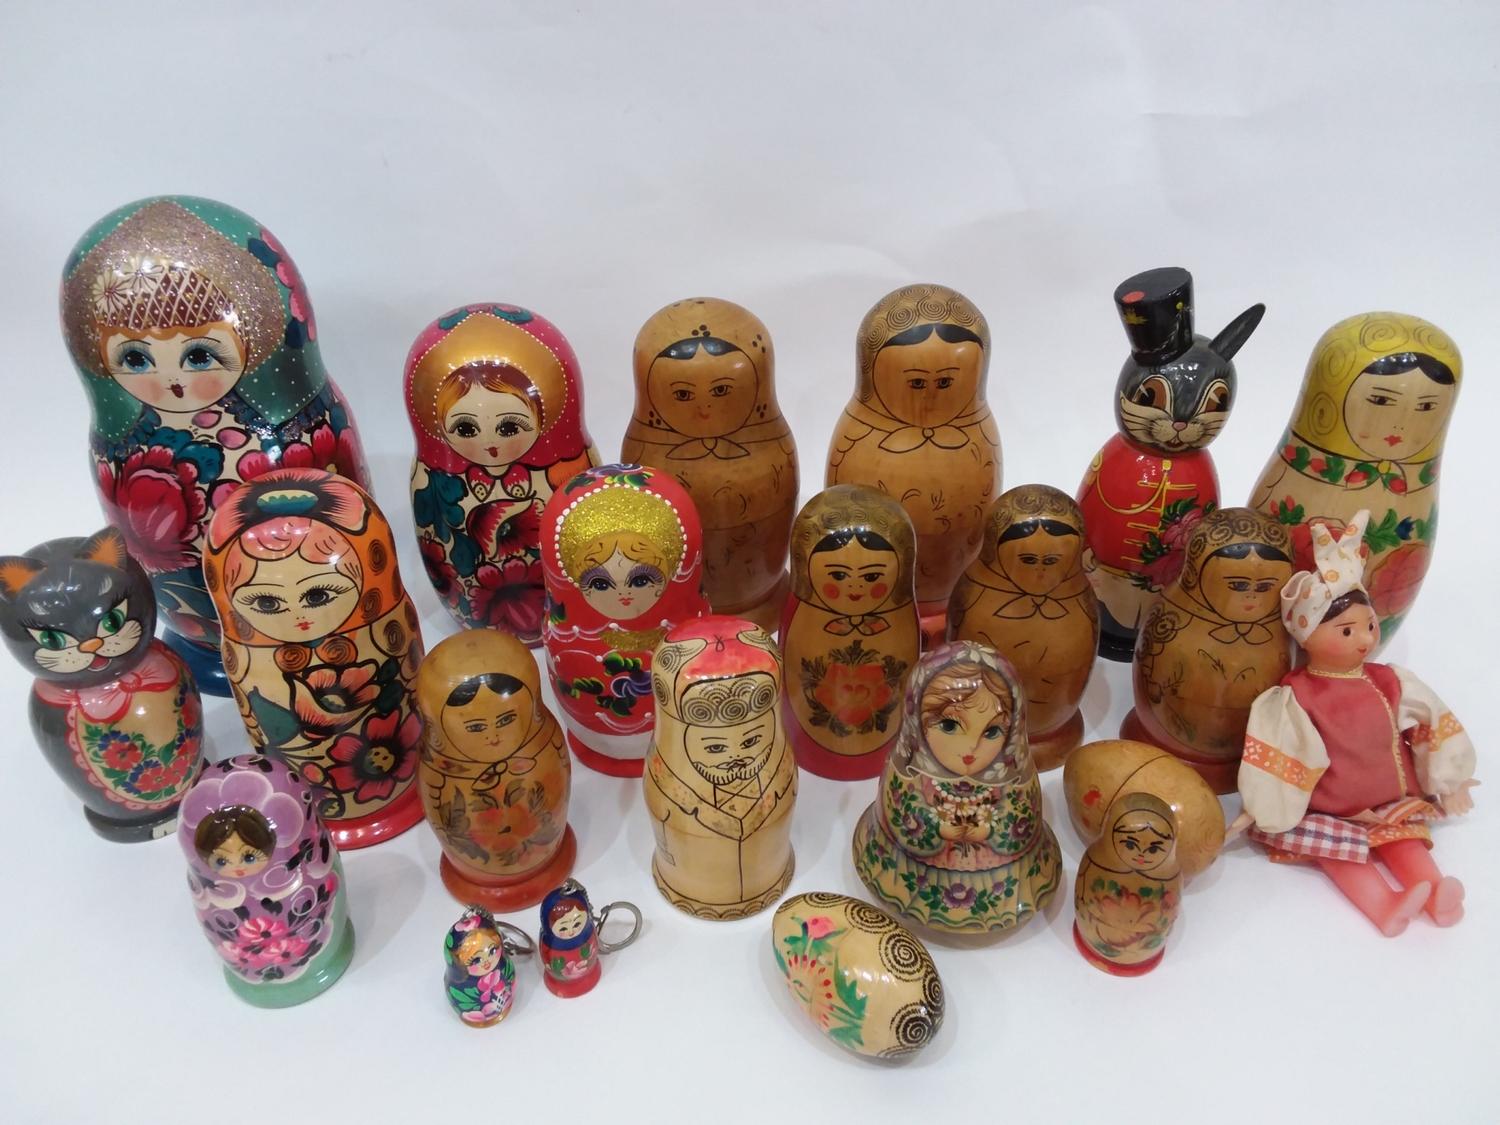 Collection of Russian Nesting Dolls - Image 6 of 6